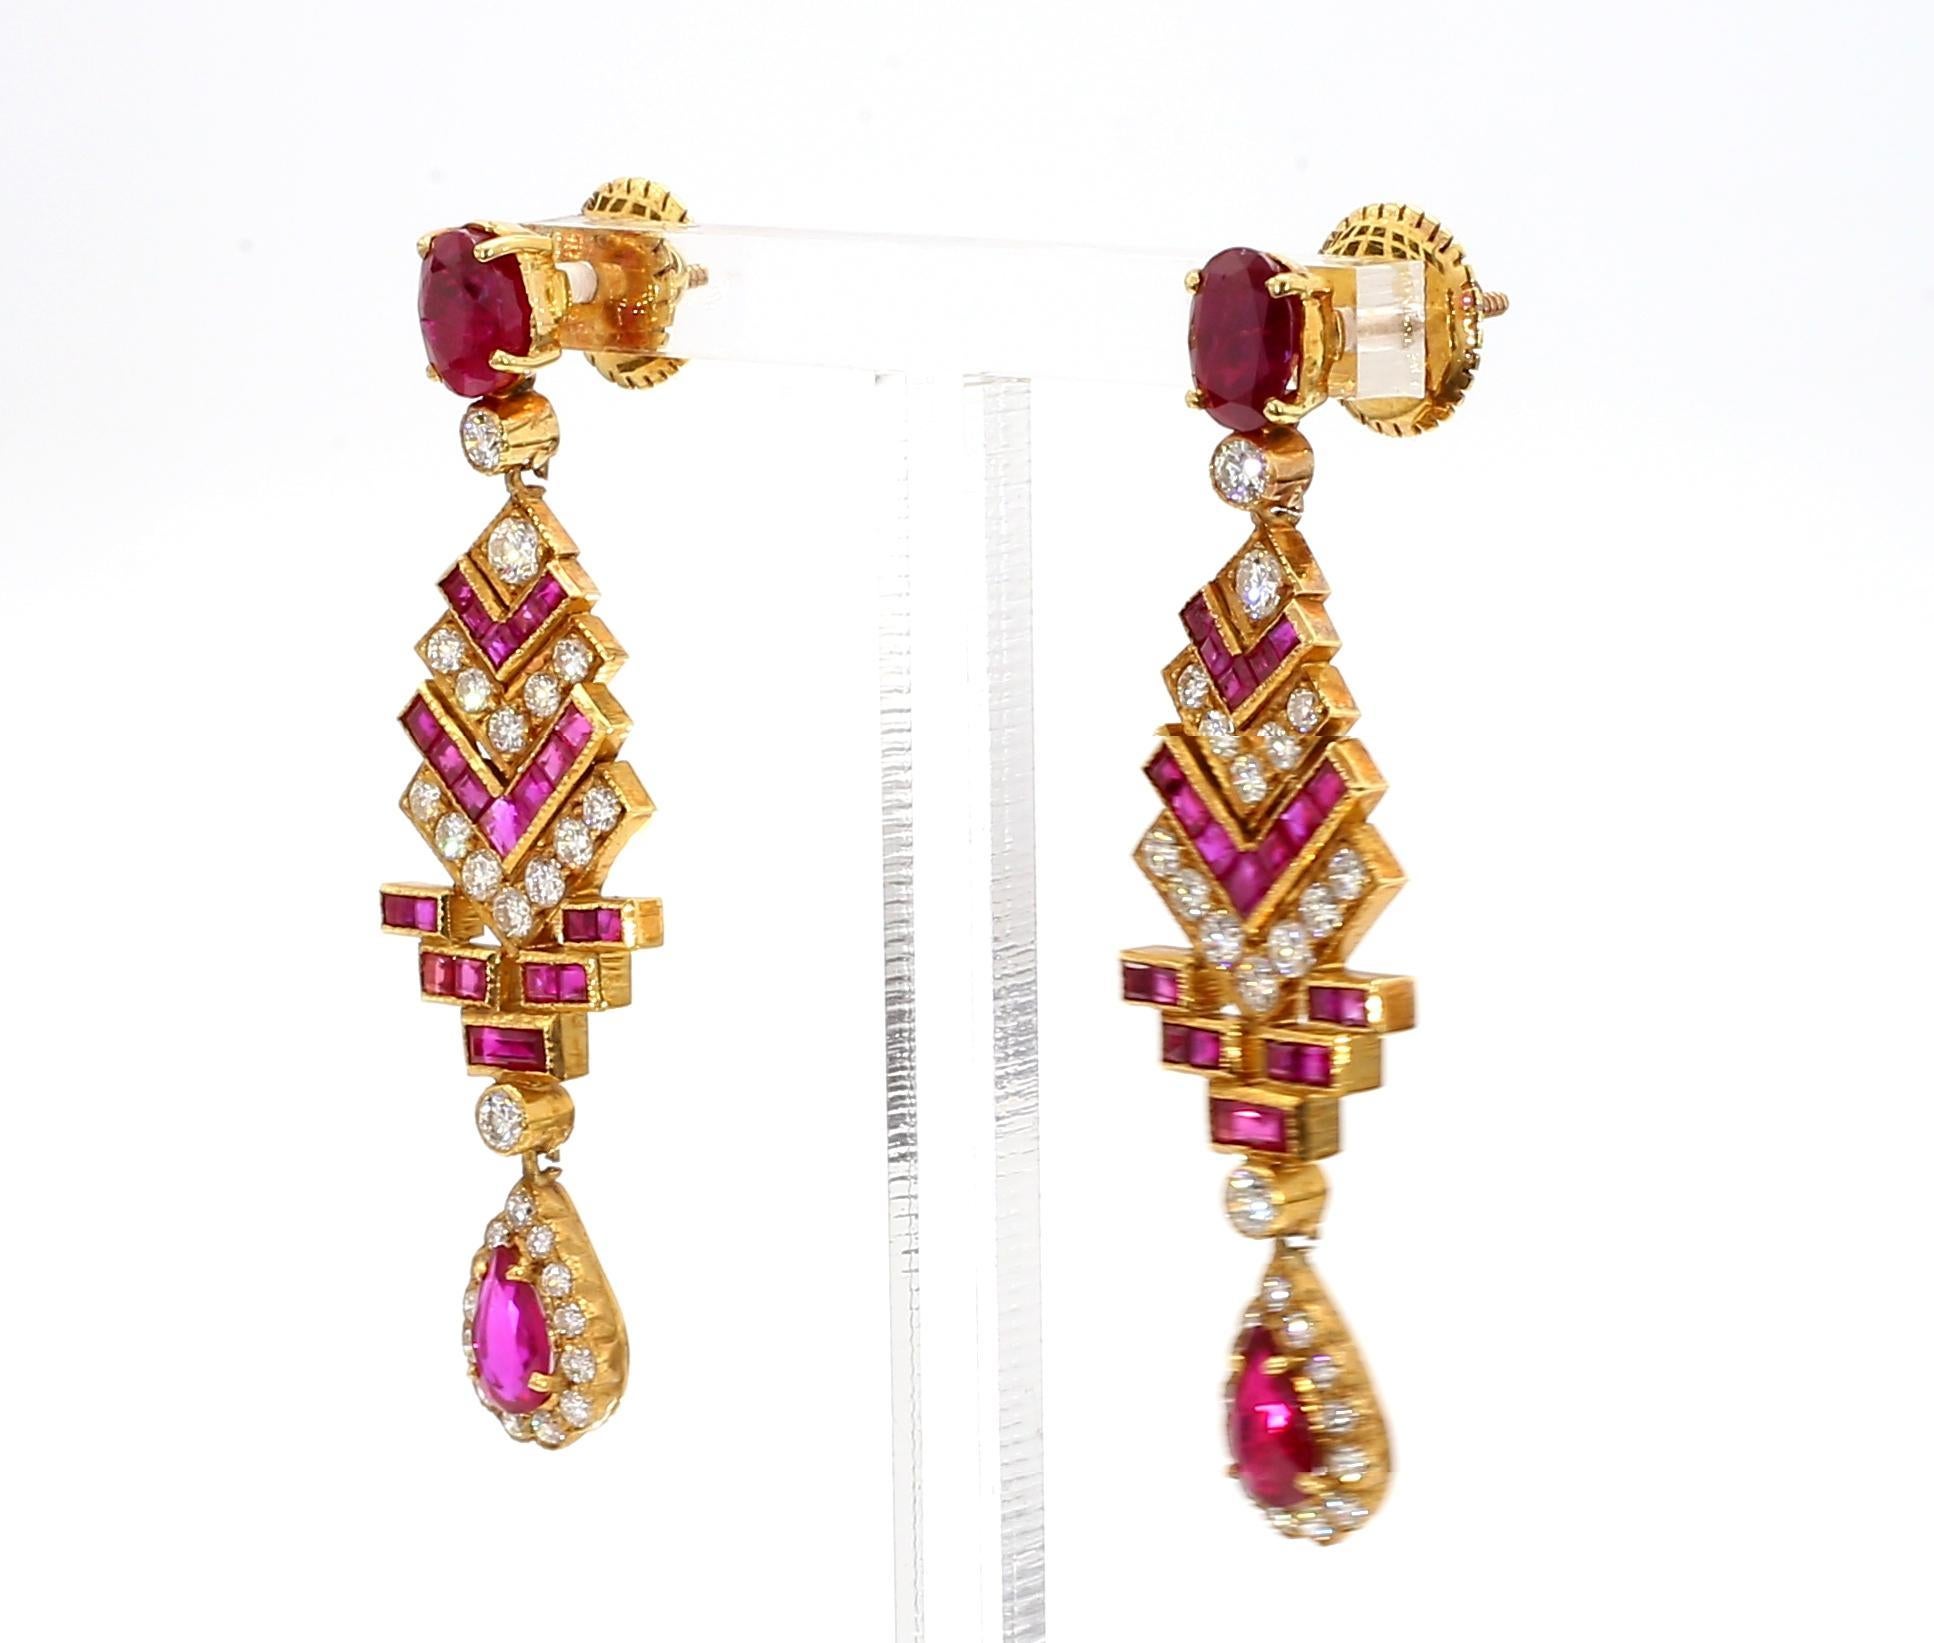 The Art Deco Style Ruby Earrings are a stunning and elegant accessory that captures the essence of the Roaring Twenties. These earrings feature gorgeous deep red rubies set in a geometric and symmetrical design, characteristic of the Art Deco